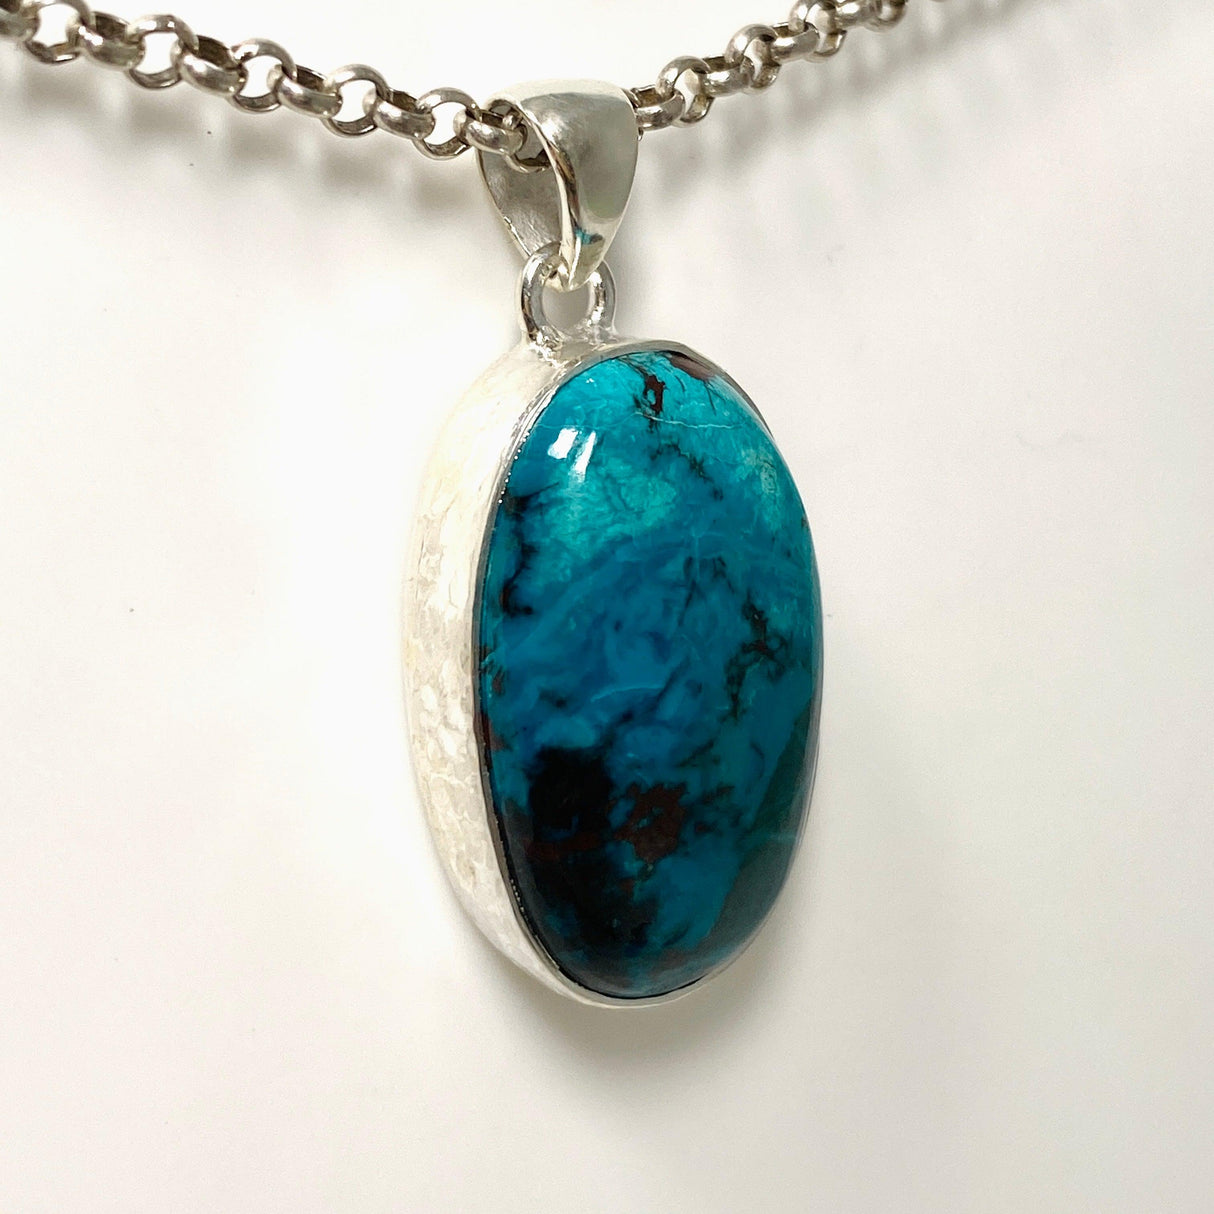 Shattuckite Oval Pendant in a Hammered Setting KPGJ4414 - Nature's Magick